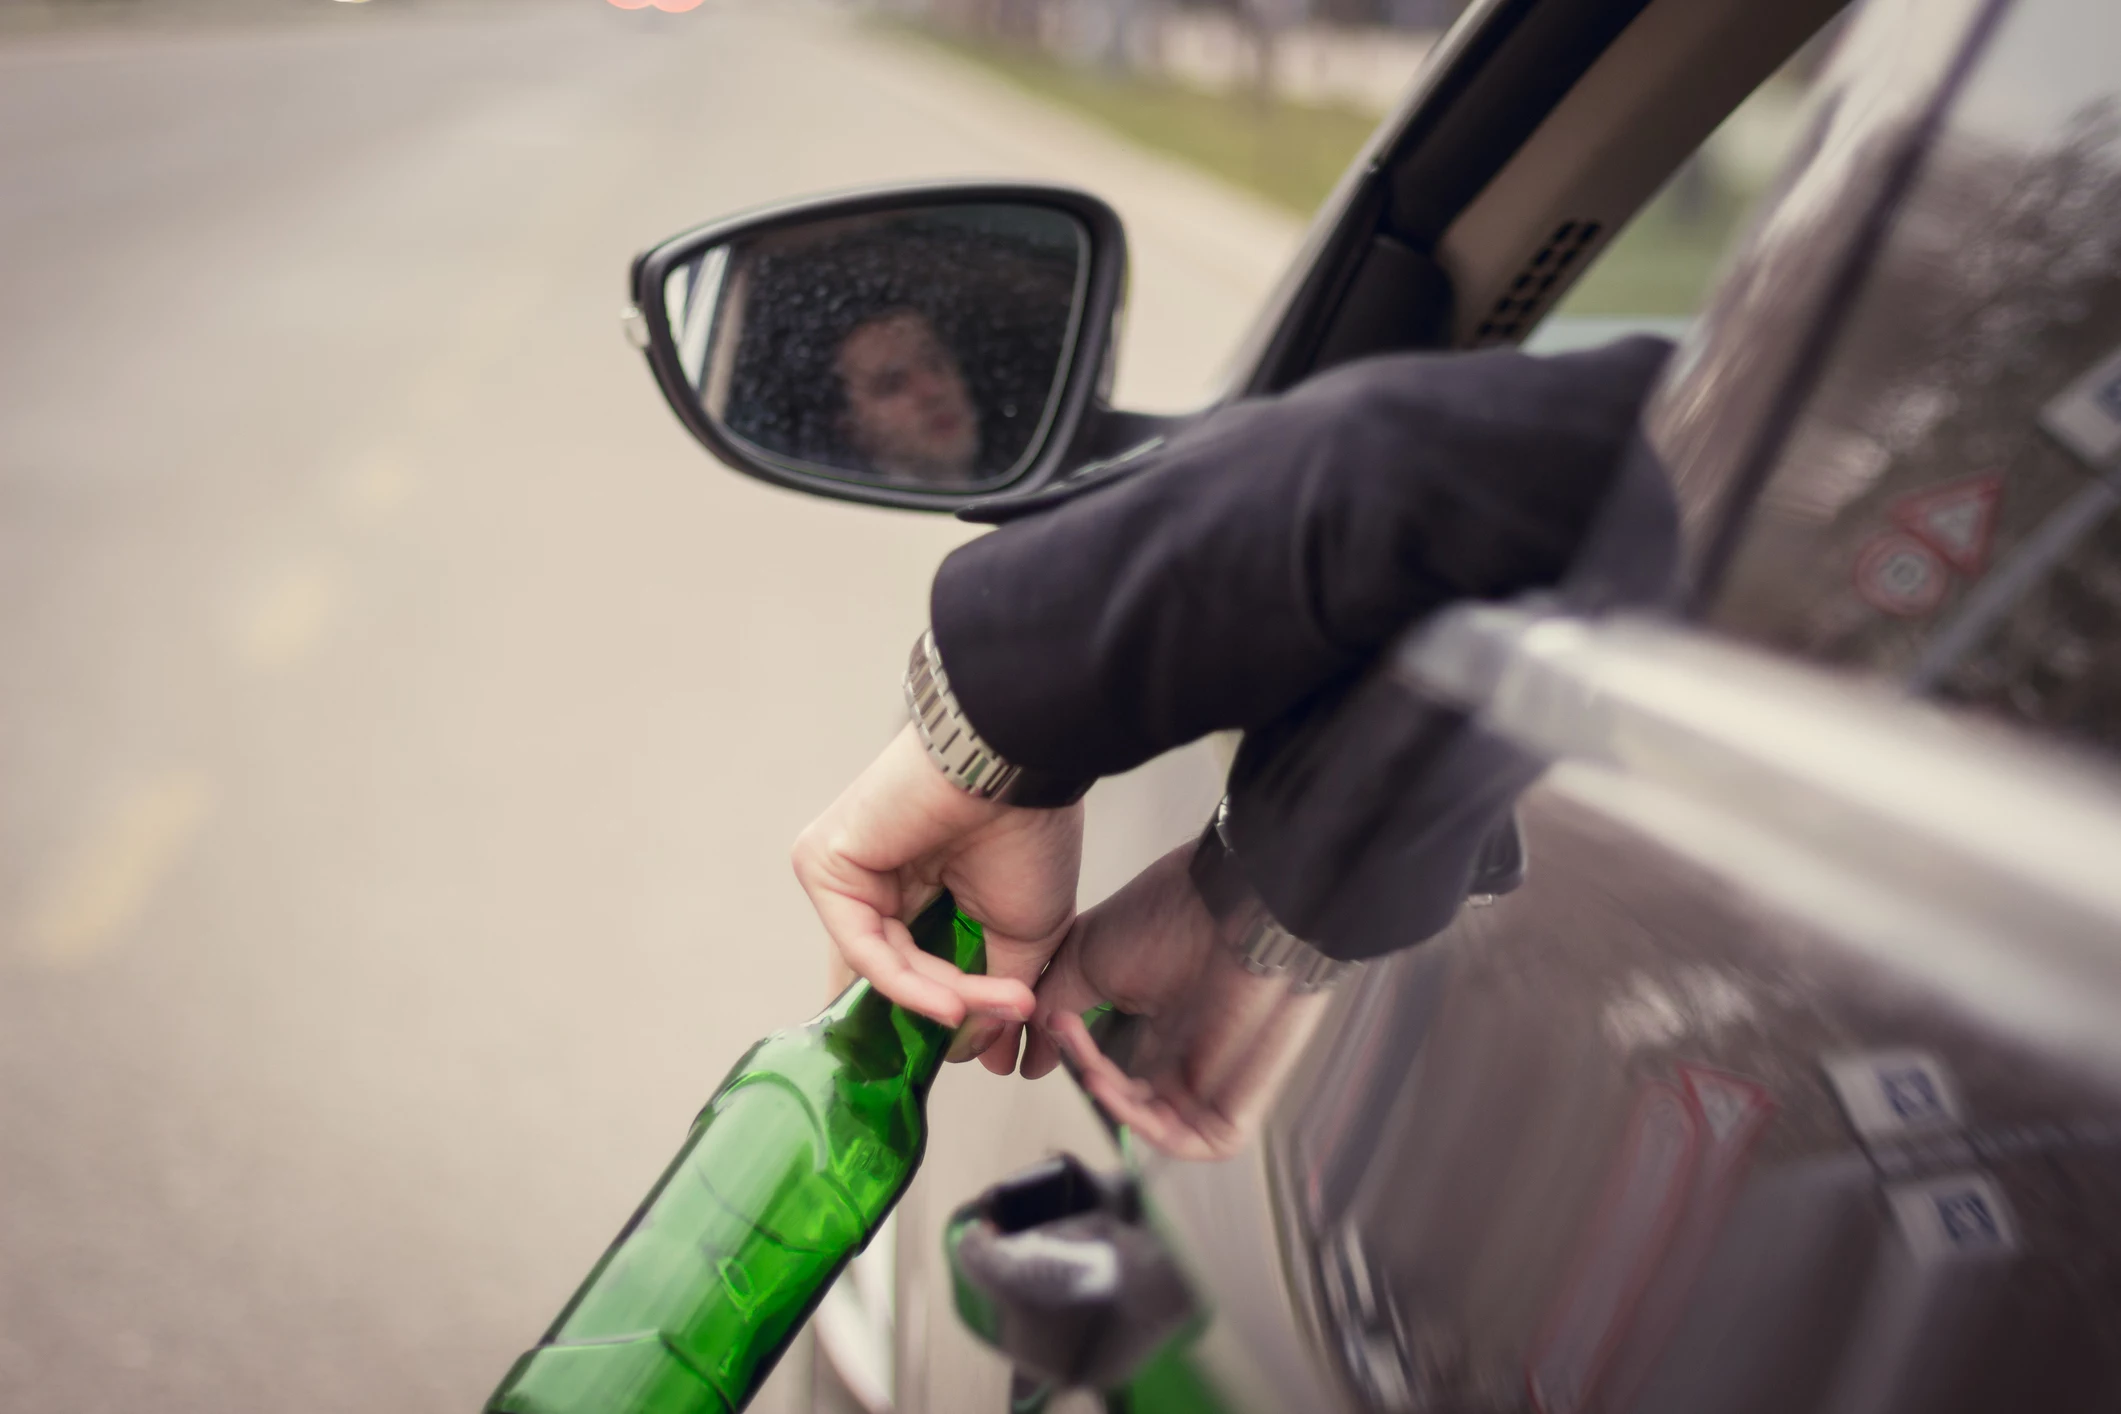 what is driving while impaired charge new york state